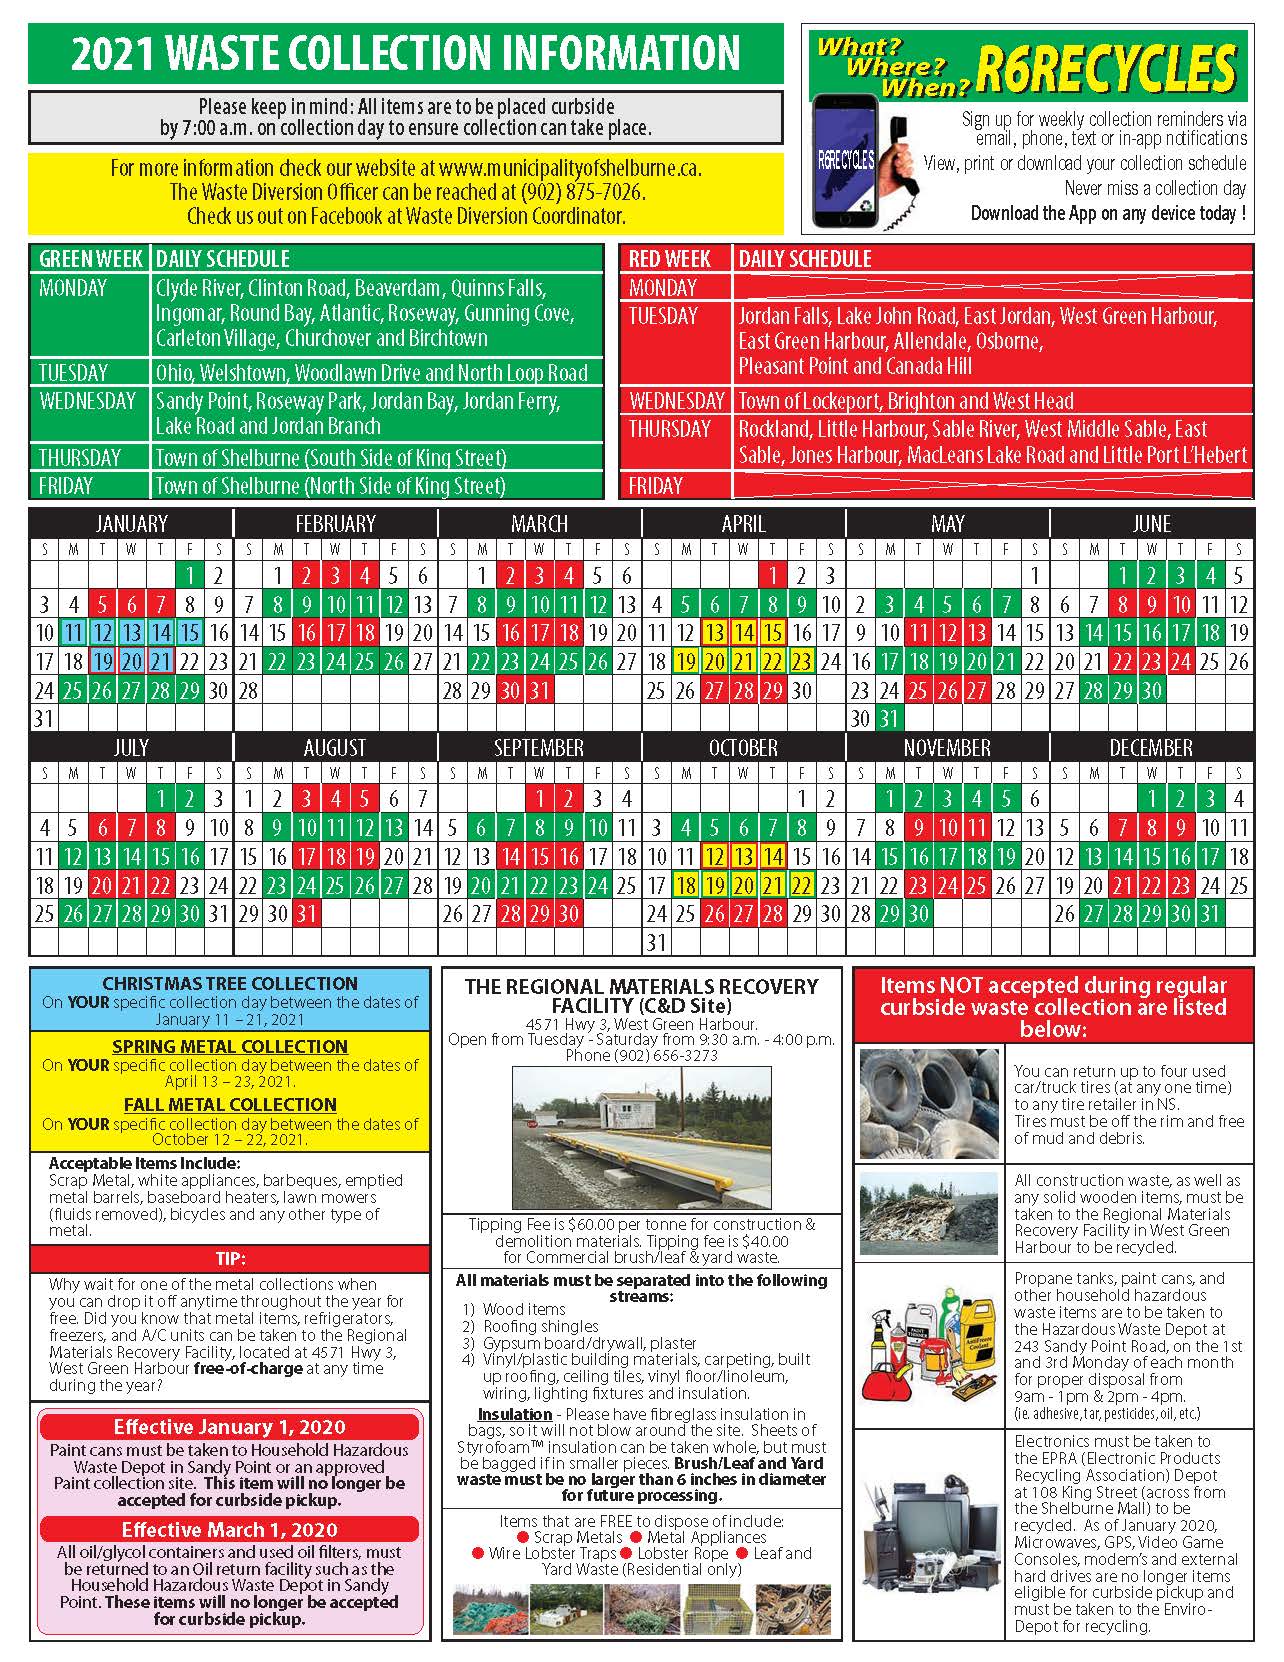 2021 waste collection calendar Page 1 002